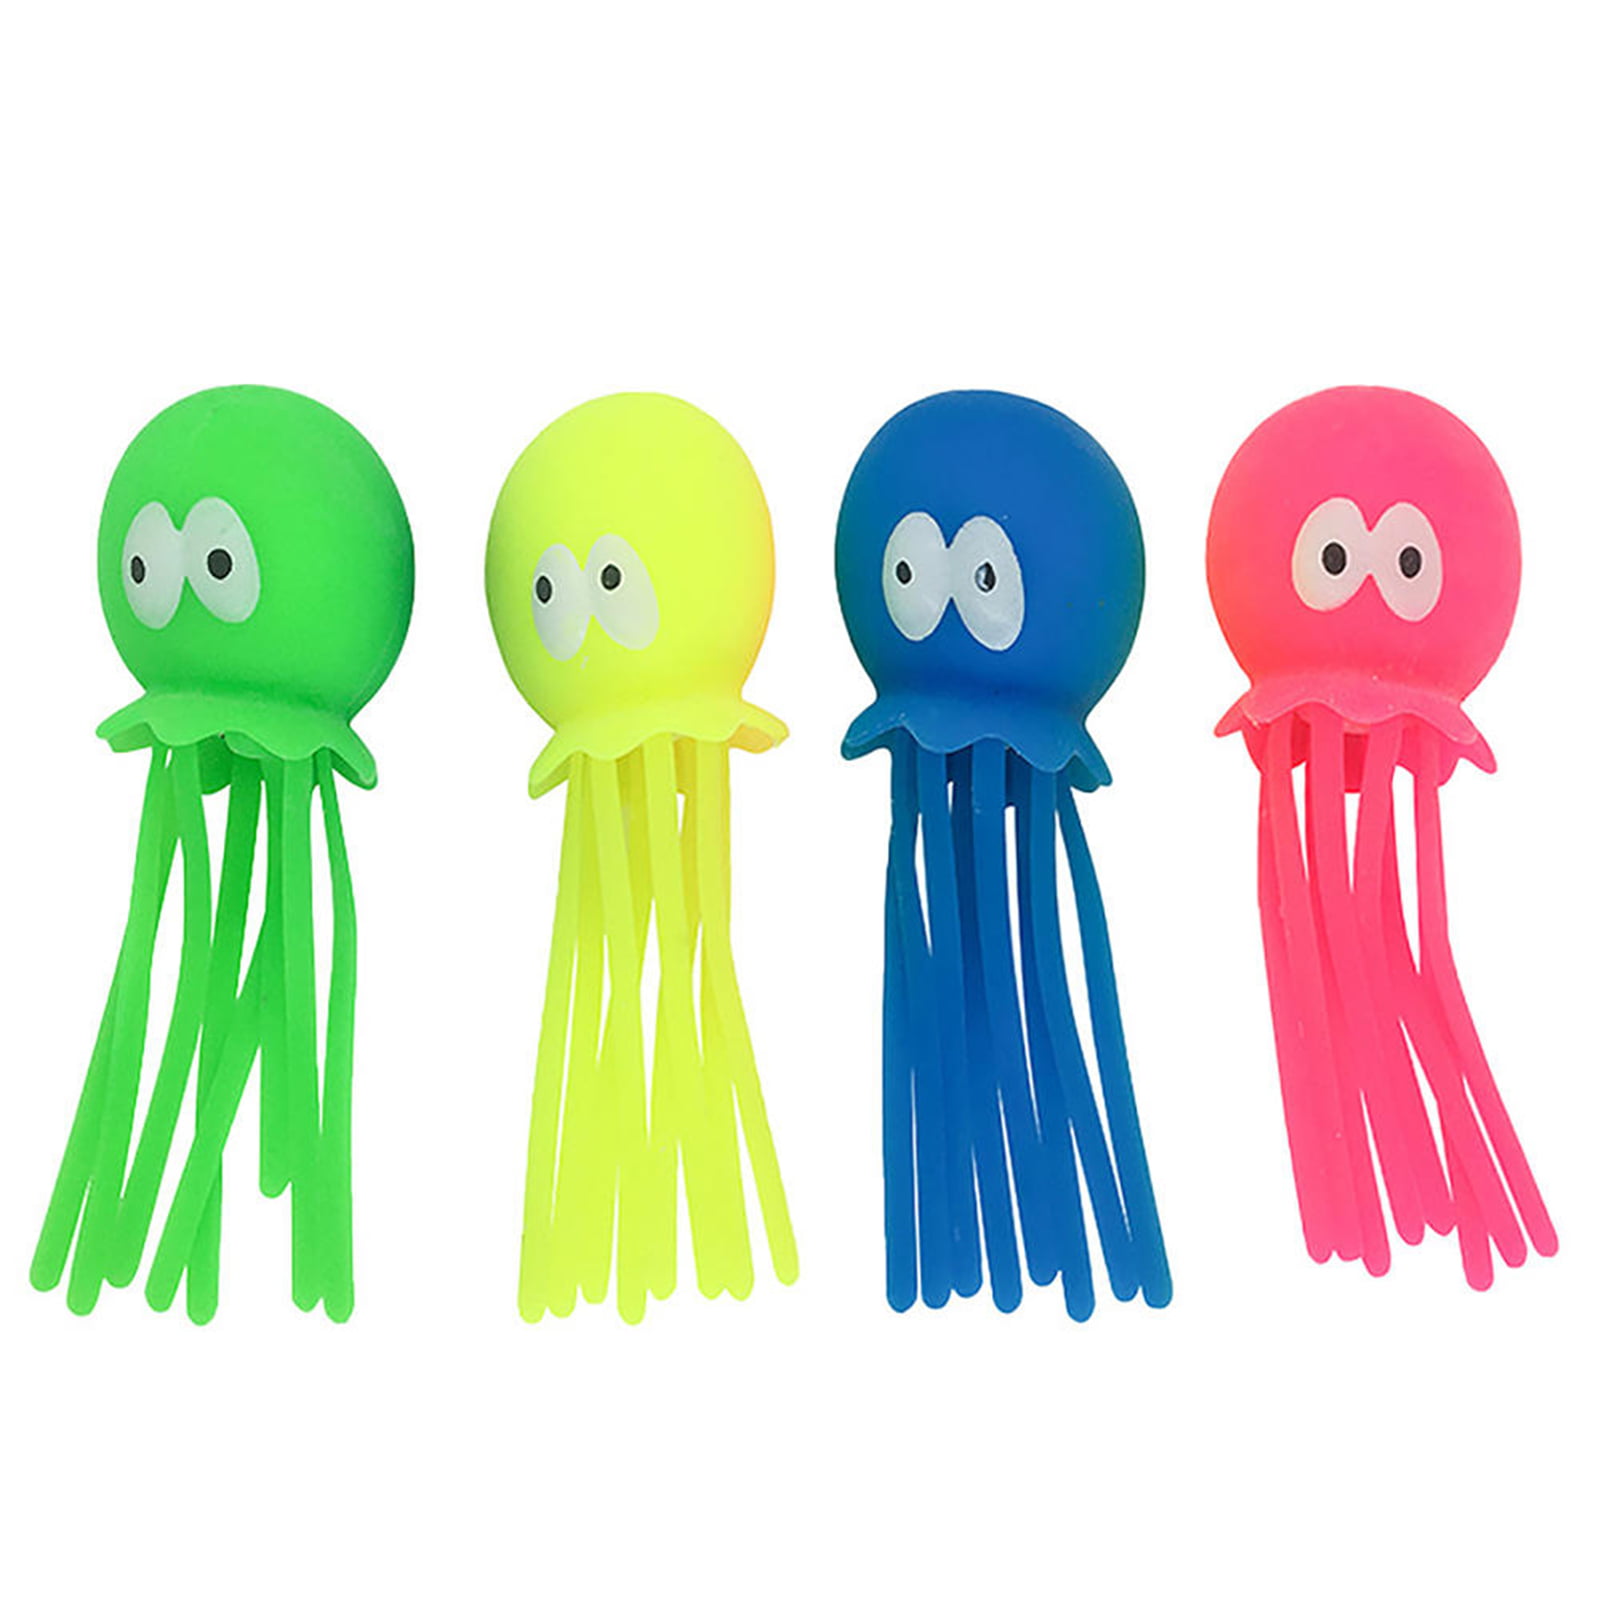 Colorful Squishy squeeze ball JELLYFISH toy autism special needs pink blue white 